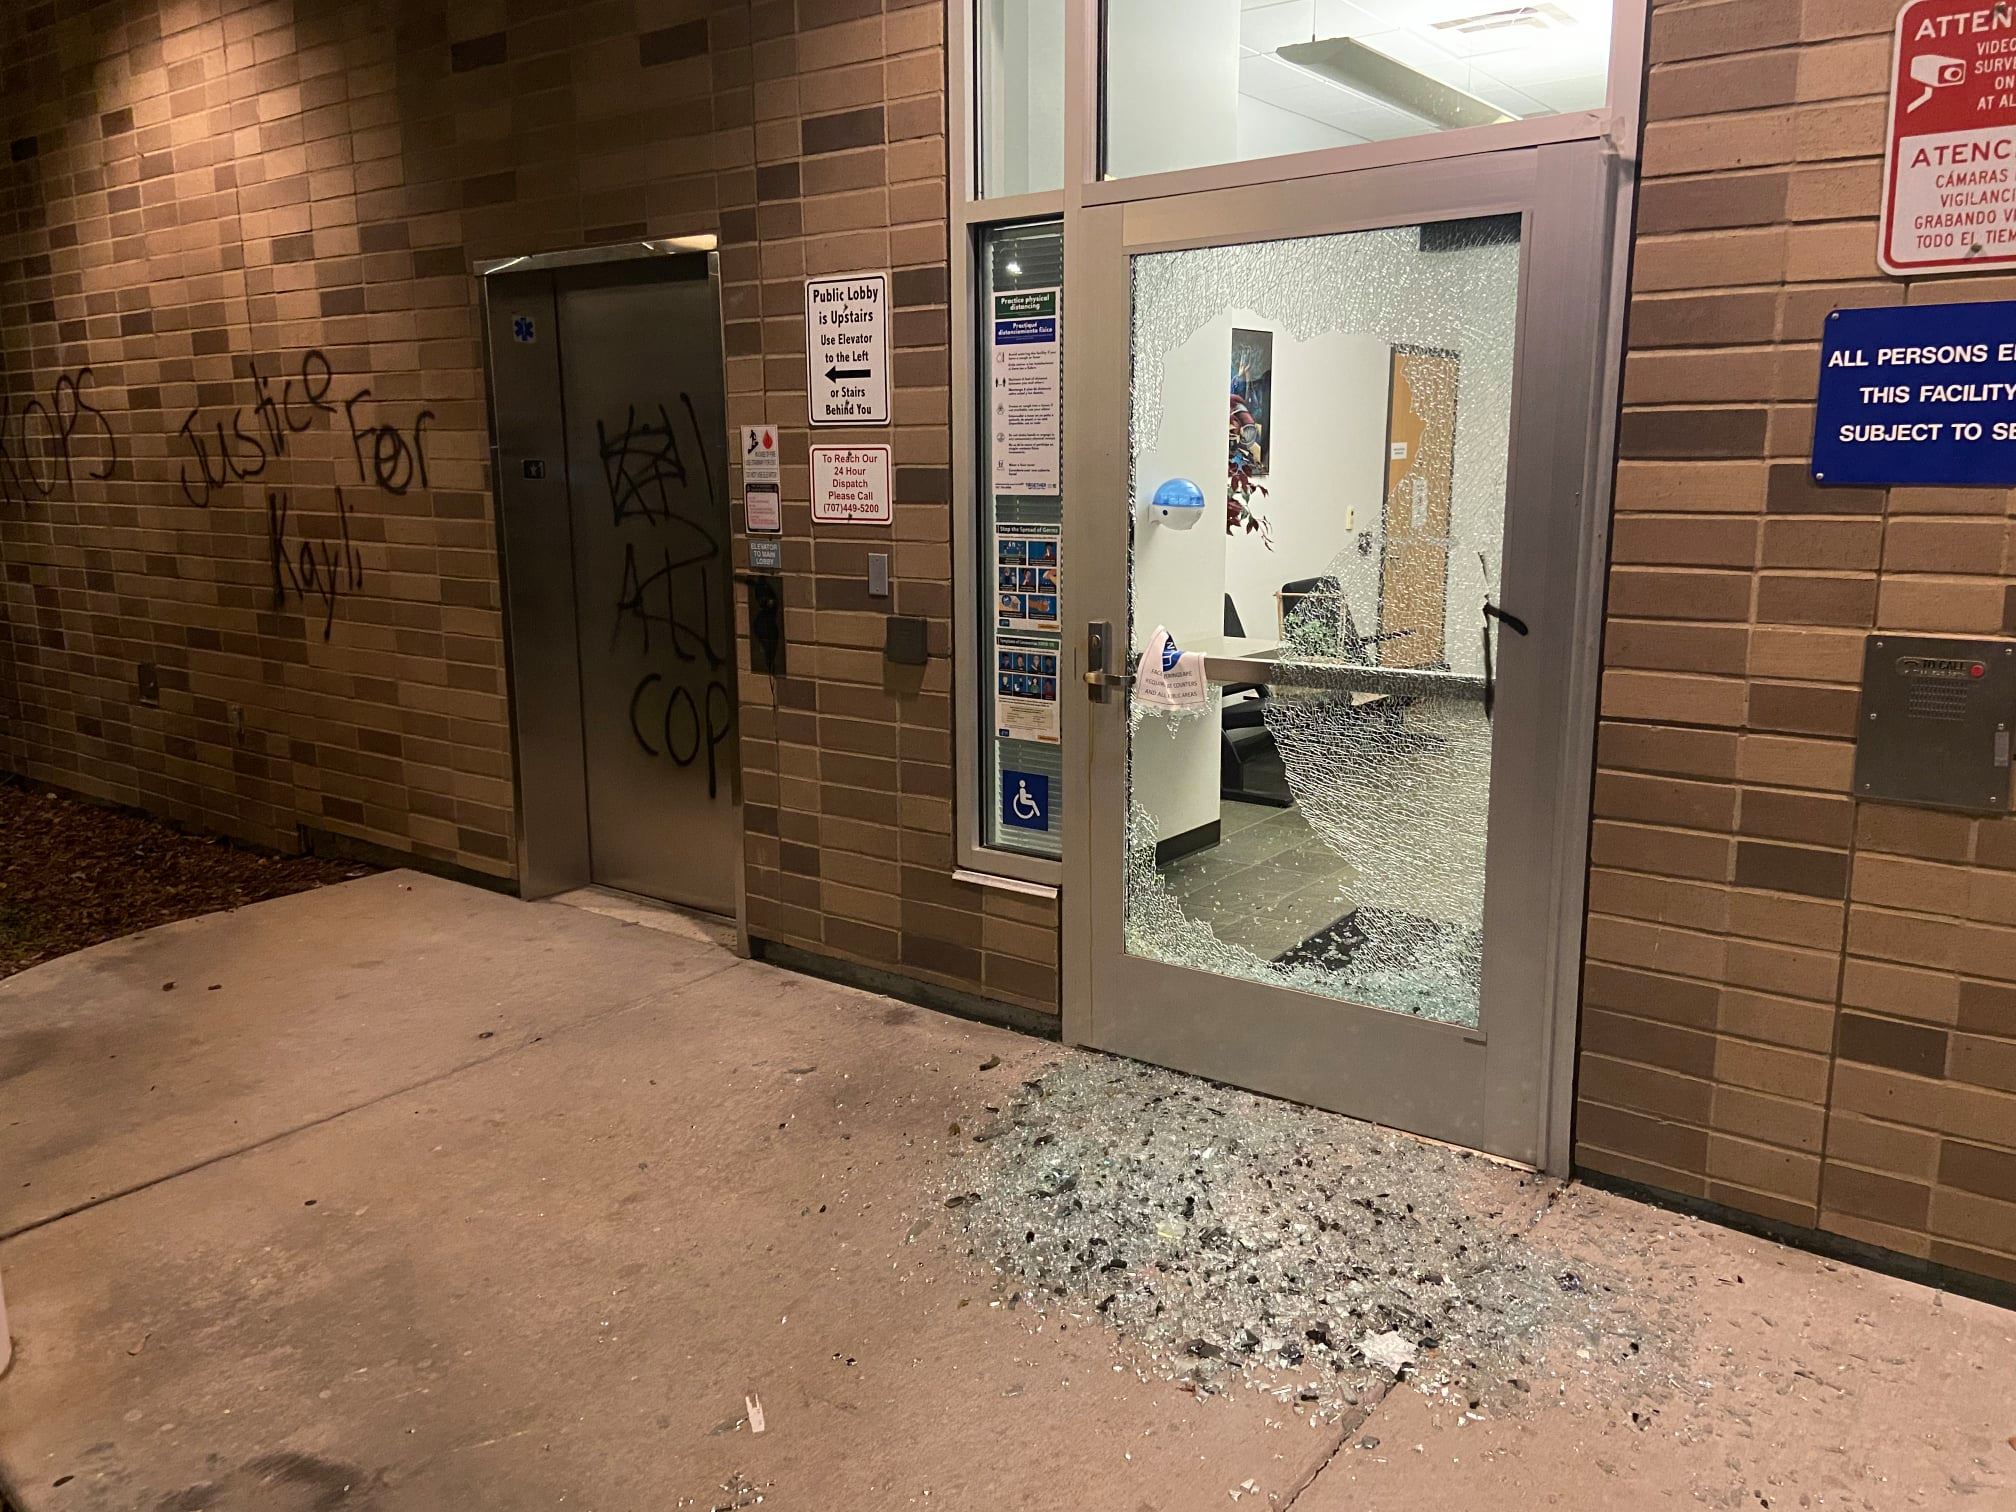 Kill All Cops': California Protesters Vandalize Police Station, City Hall  With Graffiti